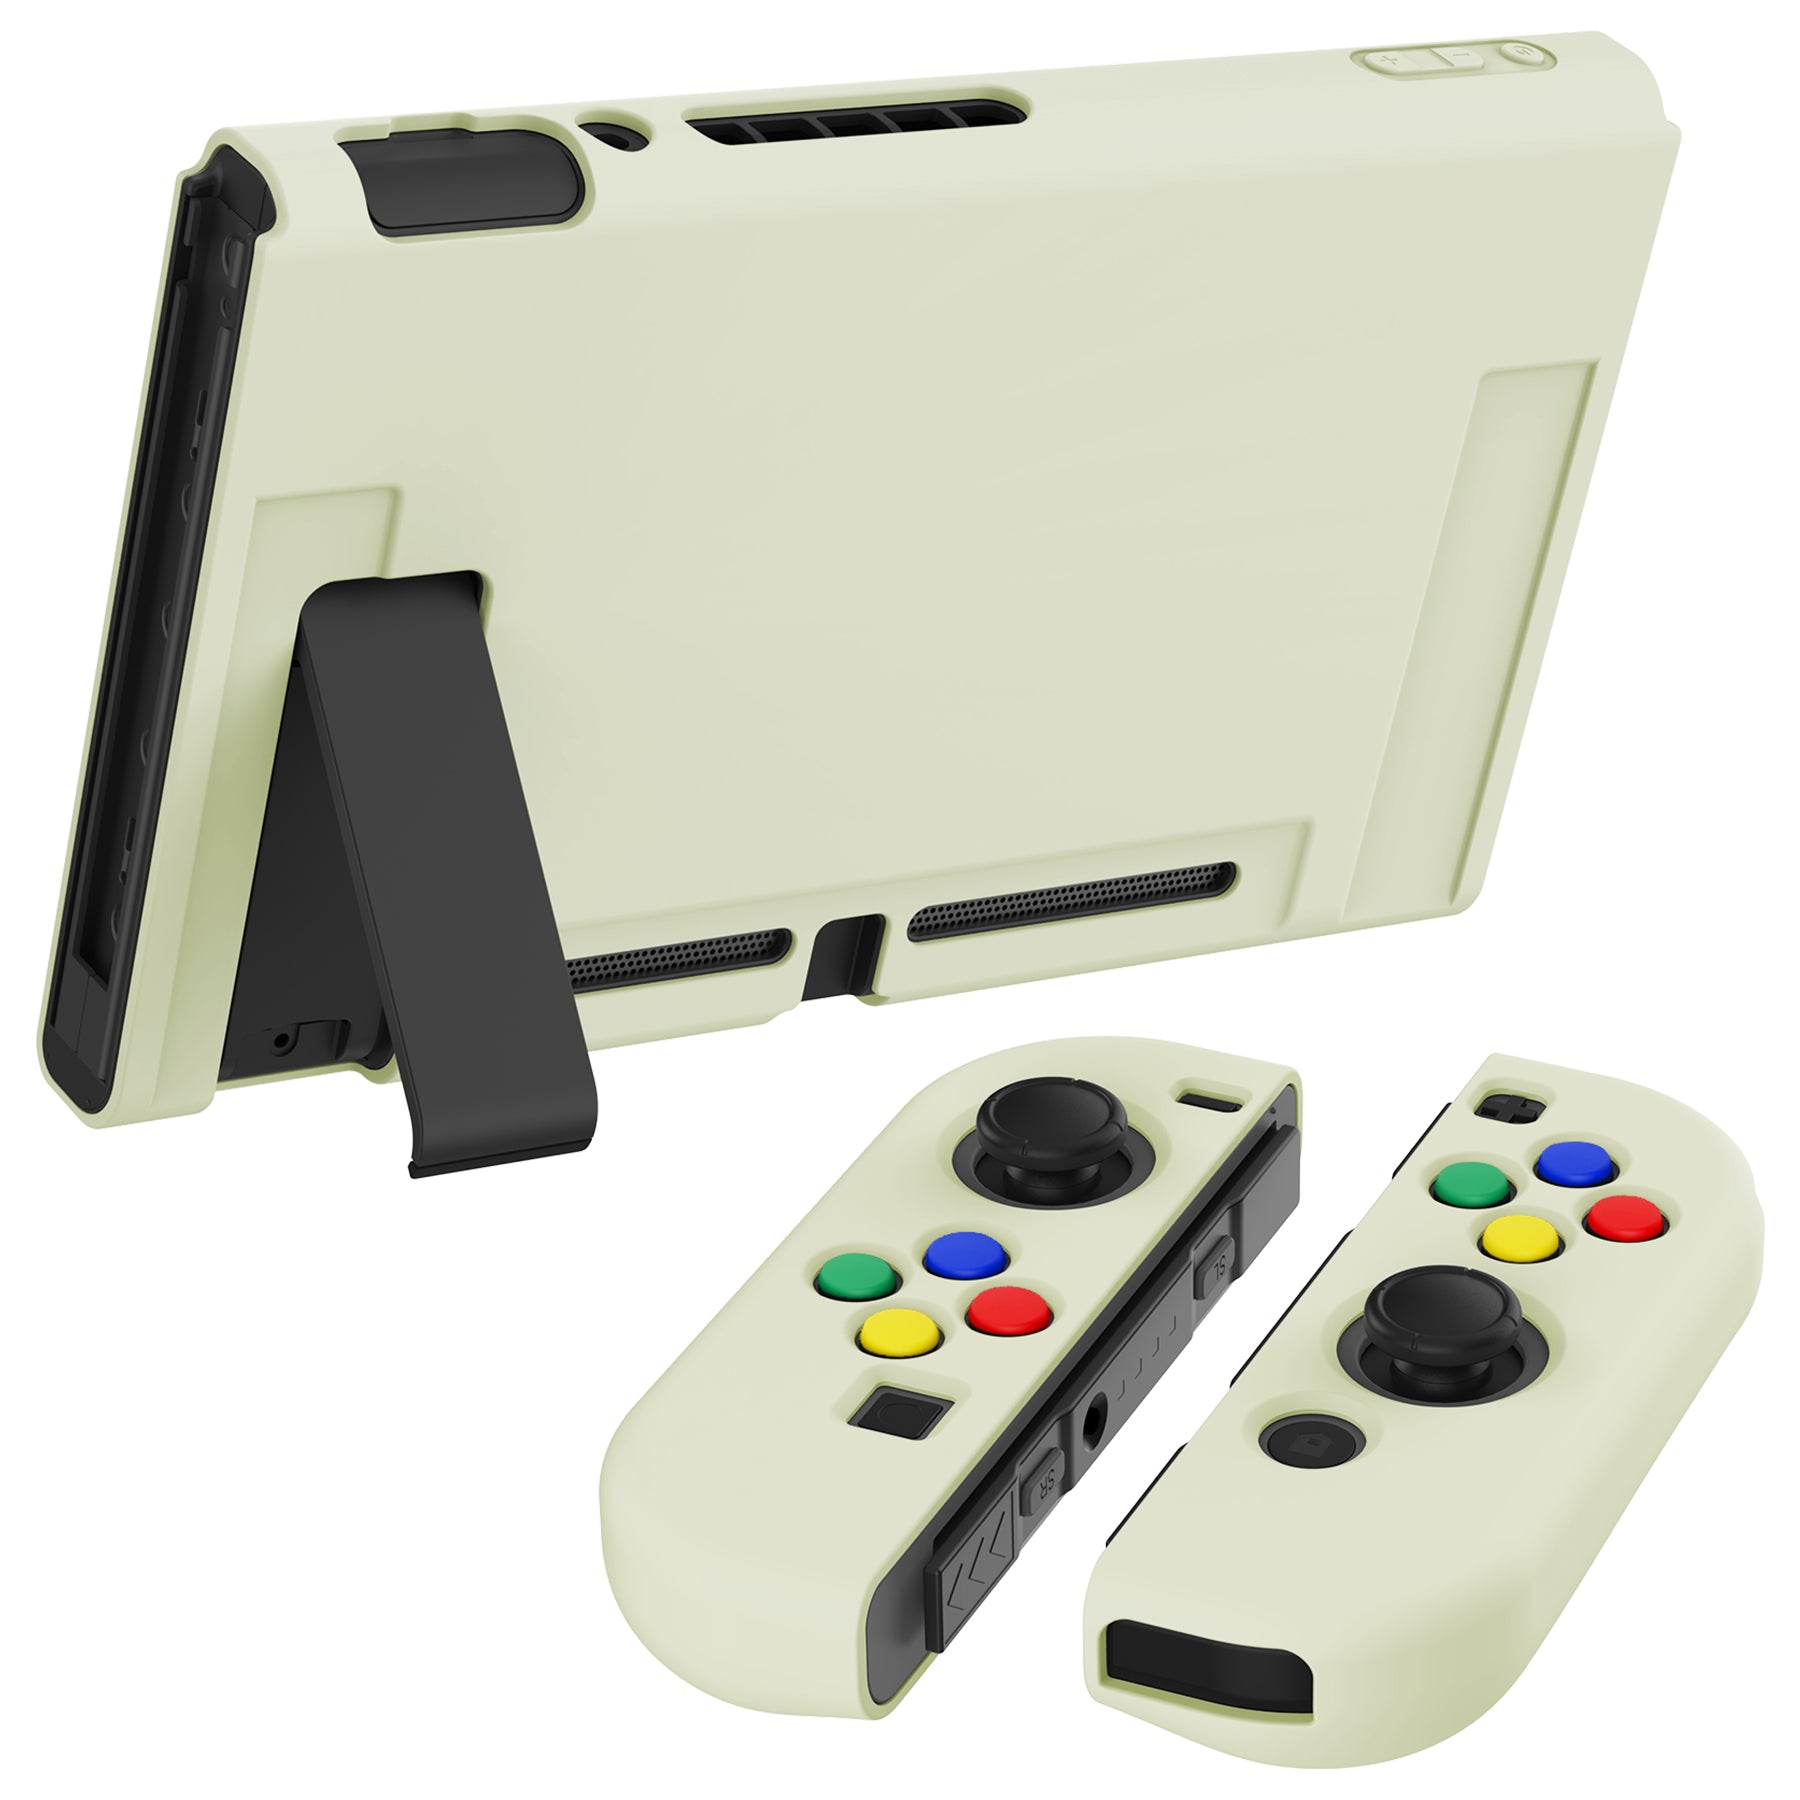 PlayVital Antique Yellow Protective Case for NS Switch, Soft TPU Slim Case Cover for NS Switch Console with Colorful ABXY Direction Button Caps - NTU6033G2 PlayVital